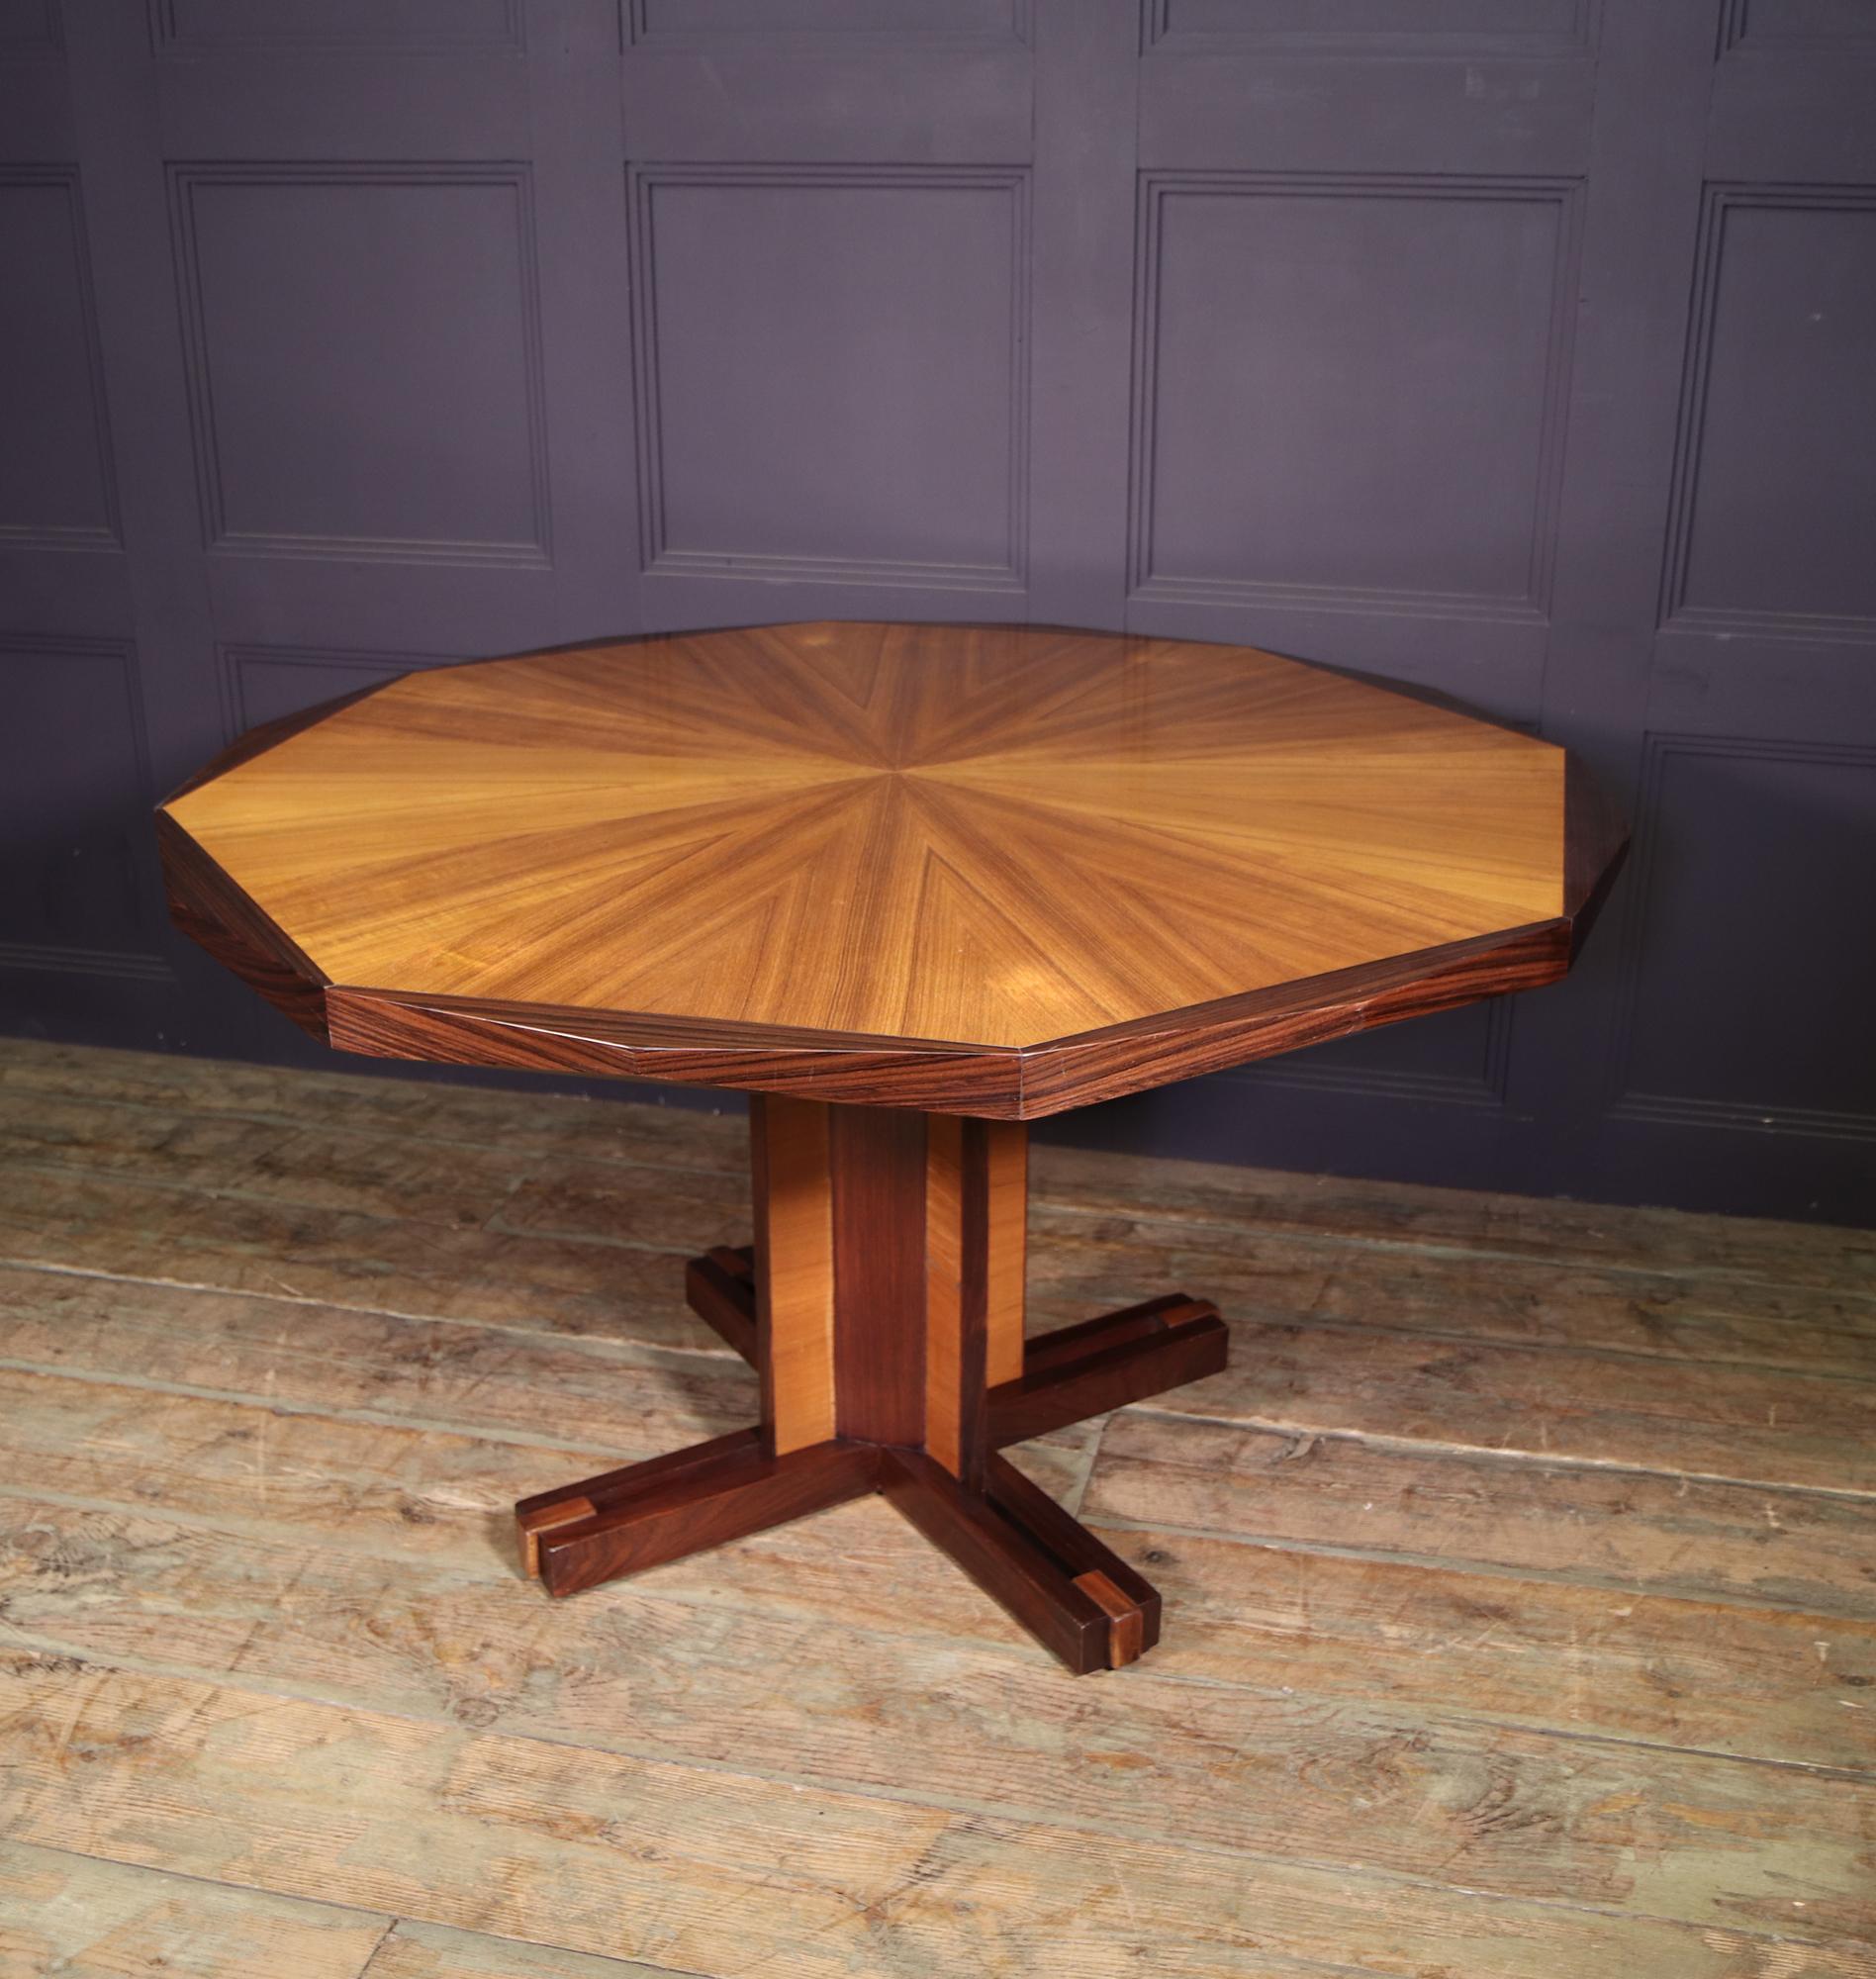 A Mid century table produced in Italy in the 1950’s in mixed timbers with a segmented circular 16 sided top. The table is in excellent original condition and has benefited from a wax finish

Age: 1950

Style: Mid Century

Material: Mixed